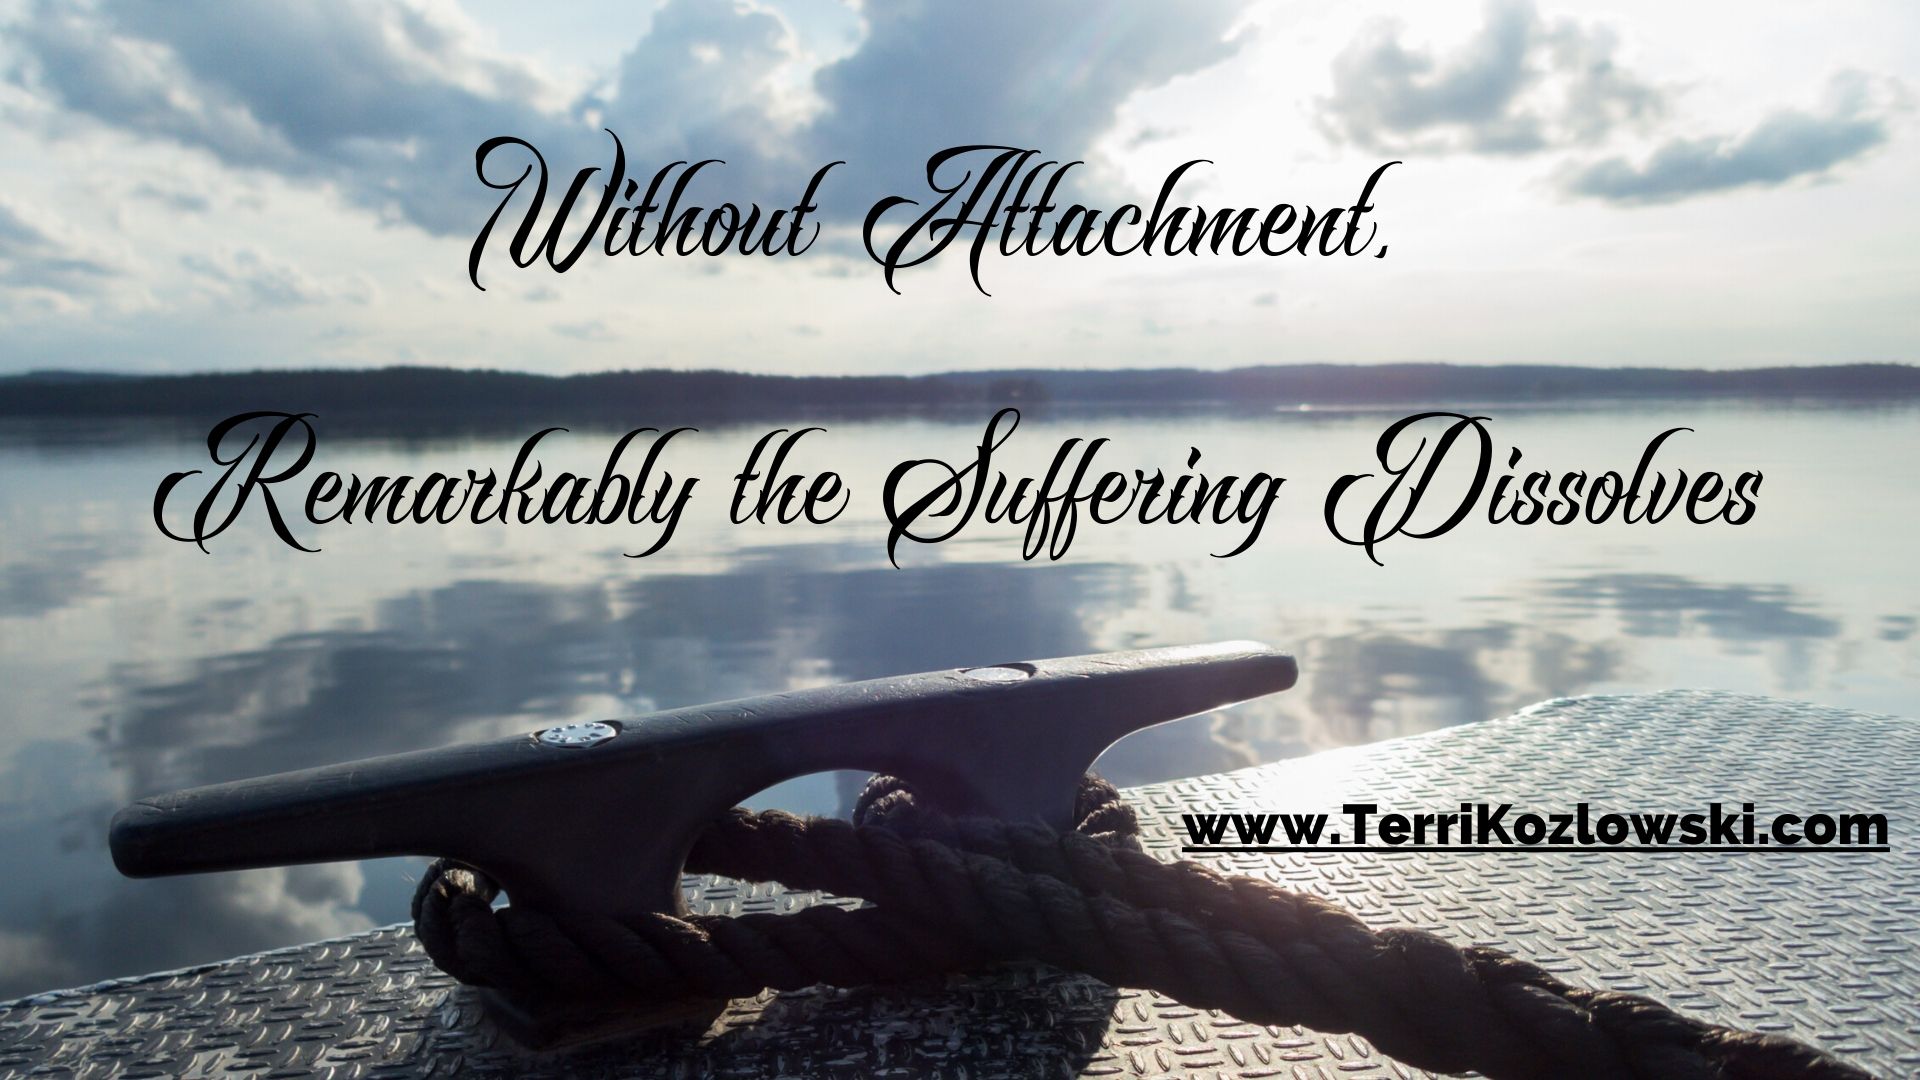 Attachment causes suffering